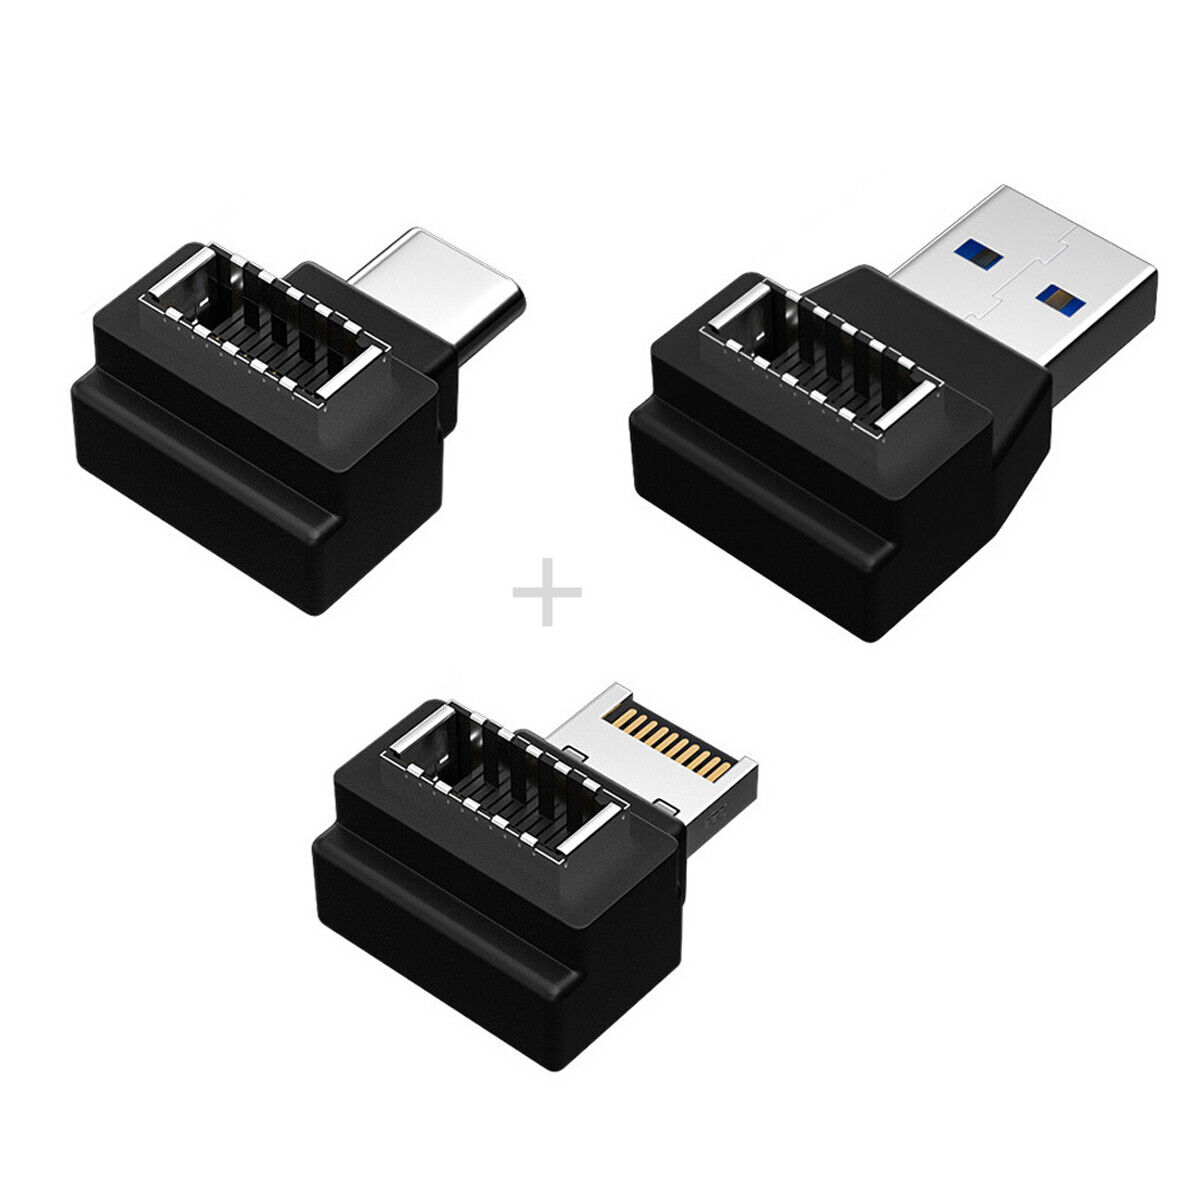 Cablecy 3pcs Header Female Type-E to Male Adapter Type-A & Type-C USB 3.1 Panel